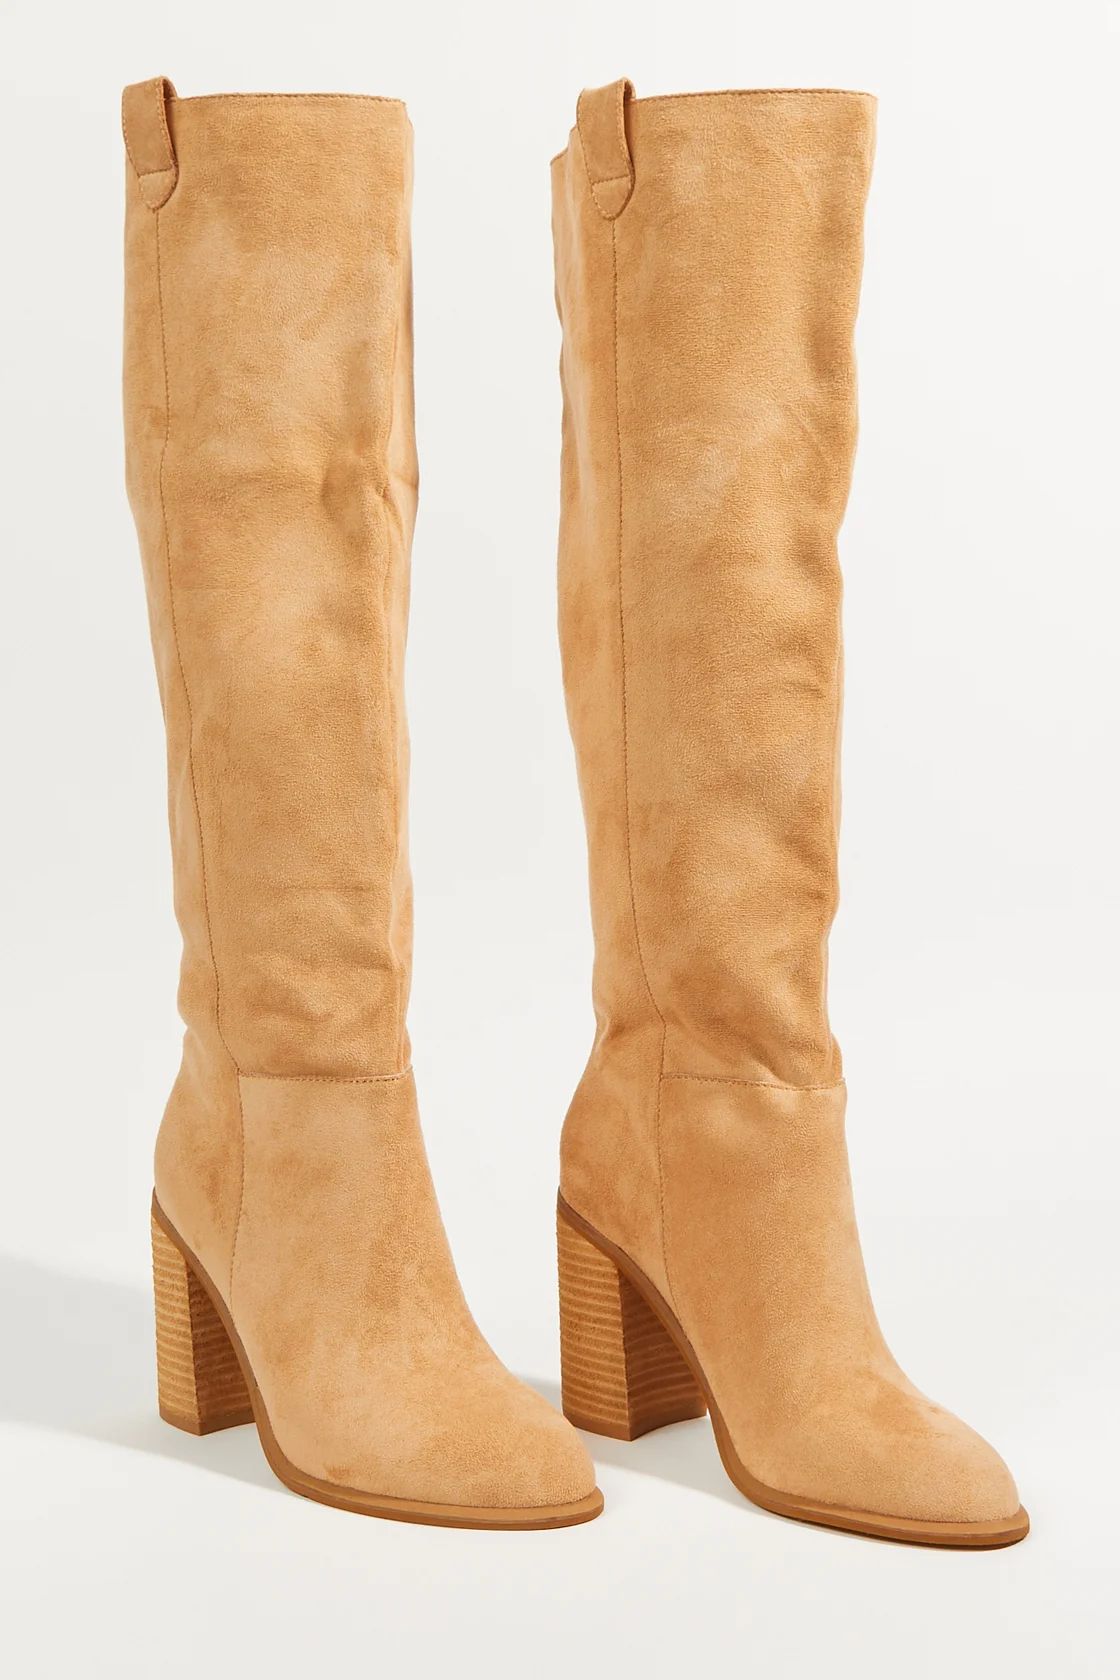 Angel Tan Suede Knee High Heeled Boots | Altar'd State | Altar'd State